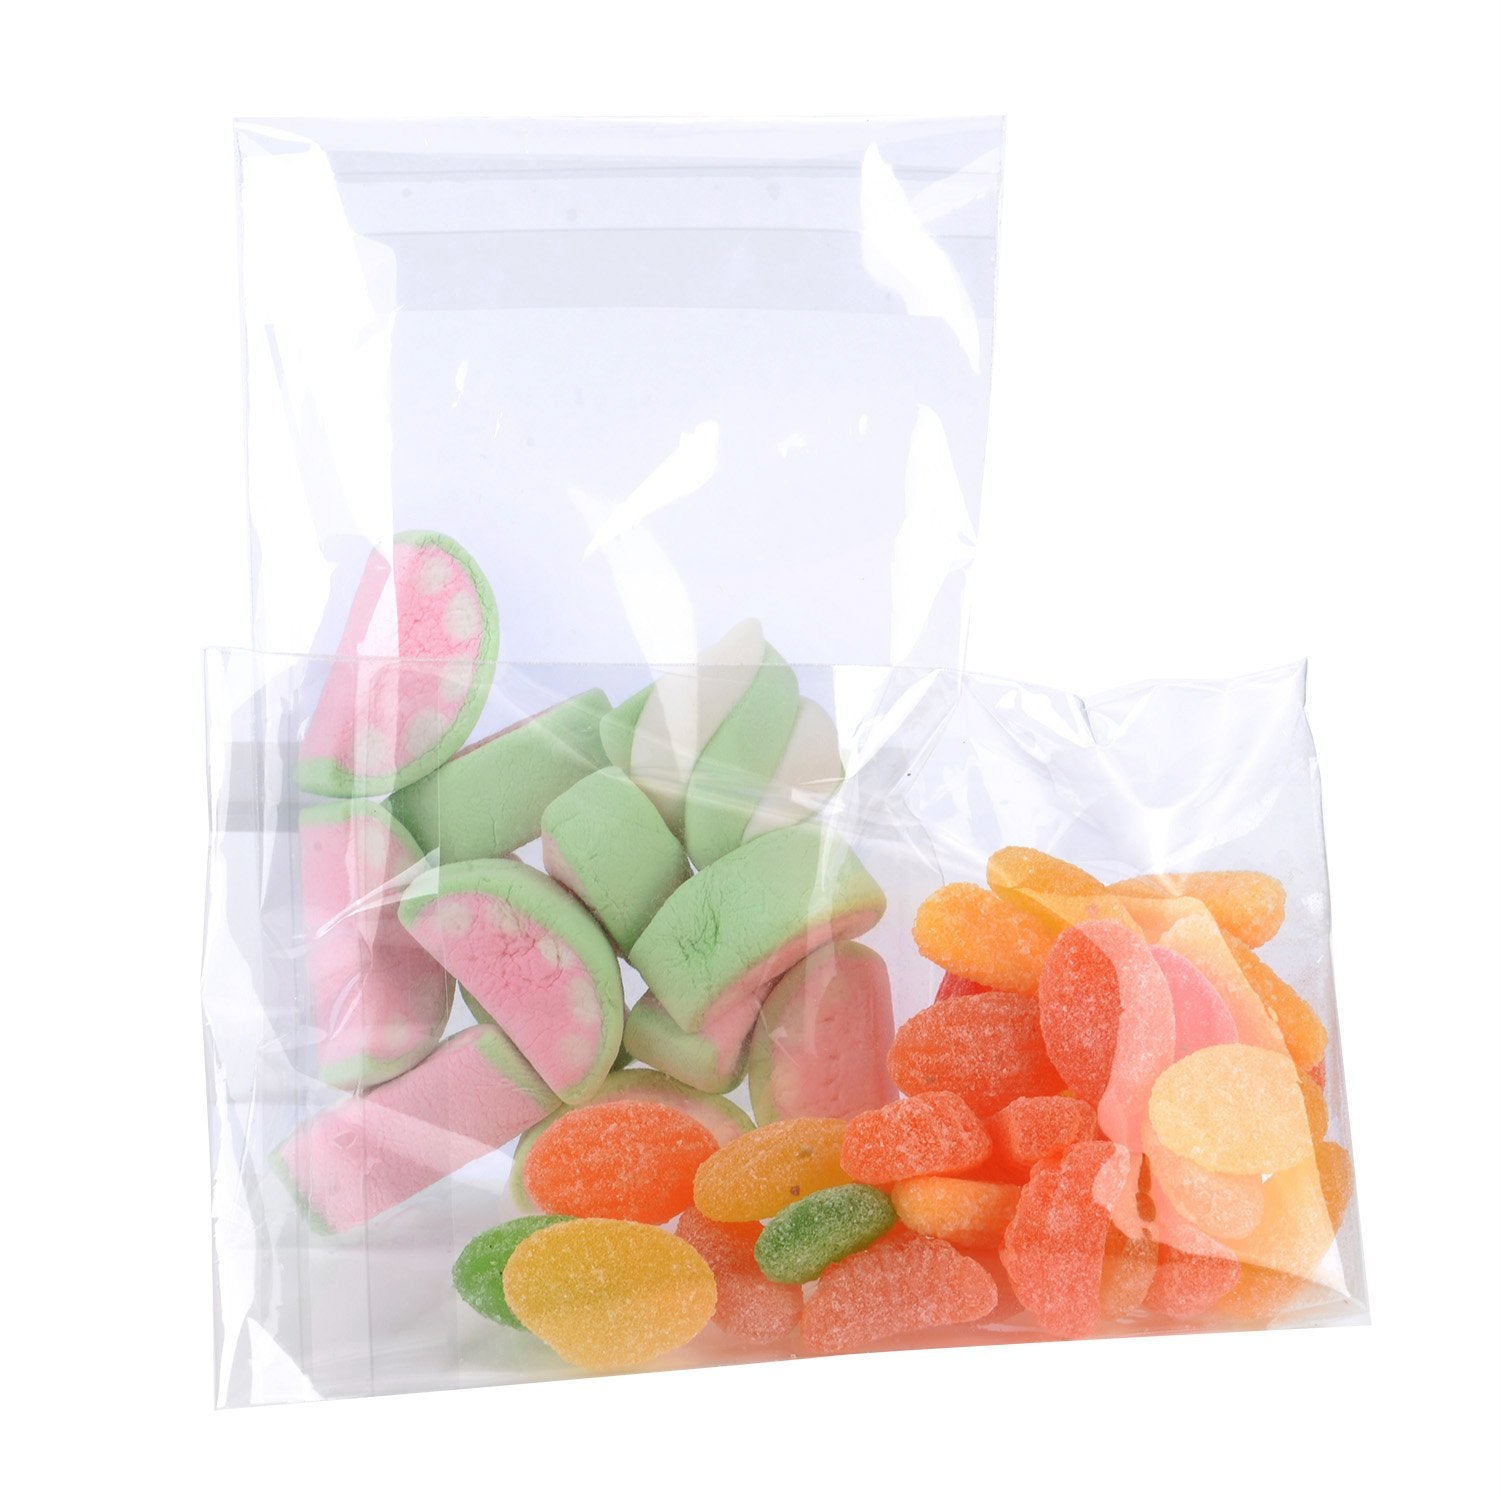 300 Pieces (3 x 5 Inches) Clear Cellophane Bags Self-adhesive Sealing Treat Bags OPP Plastic Bag for Candy, Soap, Cookie, Valentine Chocolates